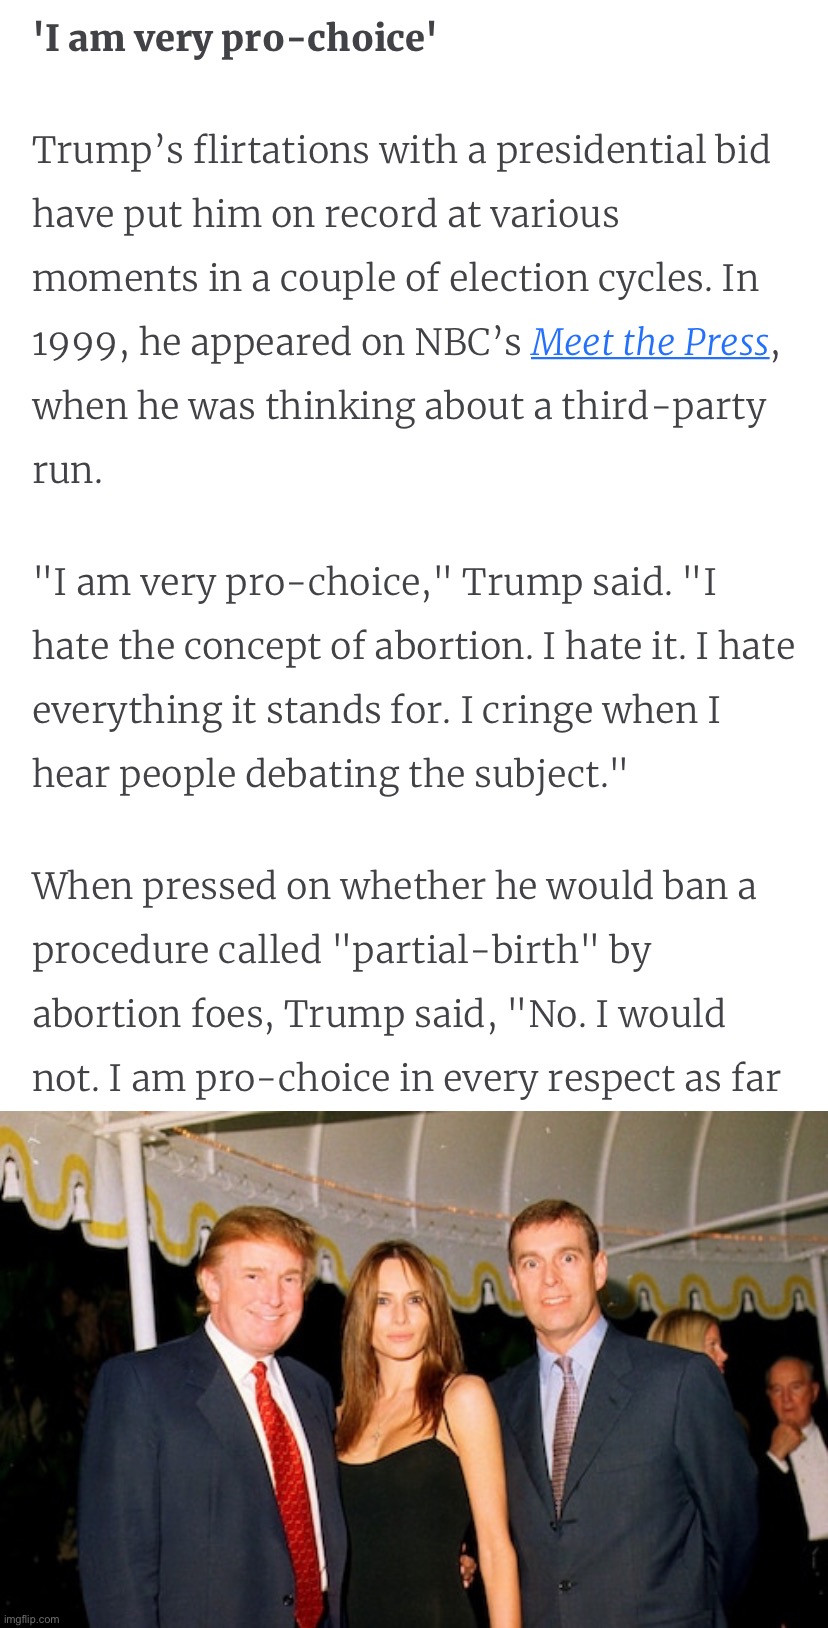 Donald Trump had a change of heart. Living proof there is hope for all liberals! | image tagged in donald trump very pro-choice,pro-choice,pro-life,donald trump,trump,liberals | made w/ Imgflip meme maker